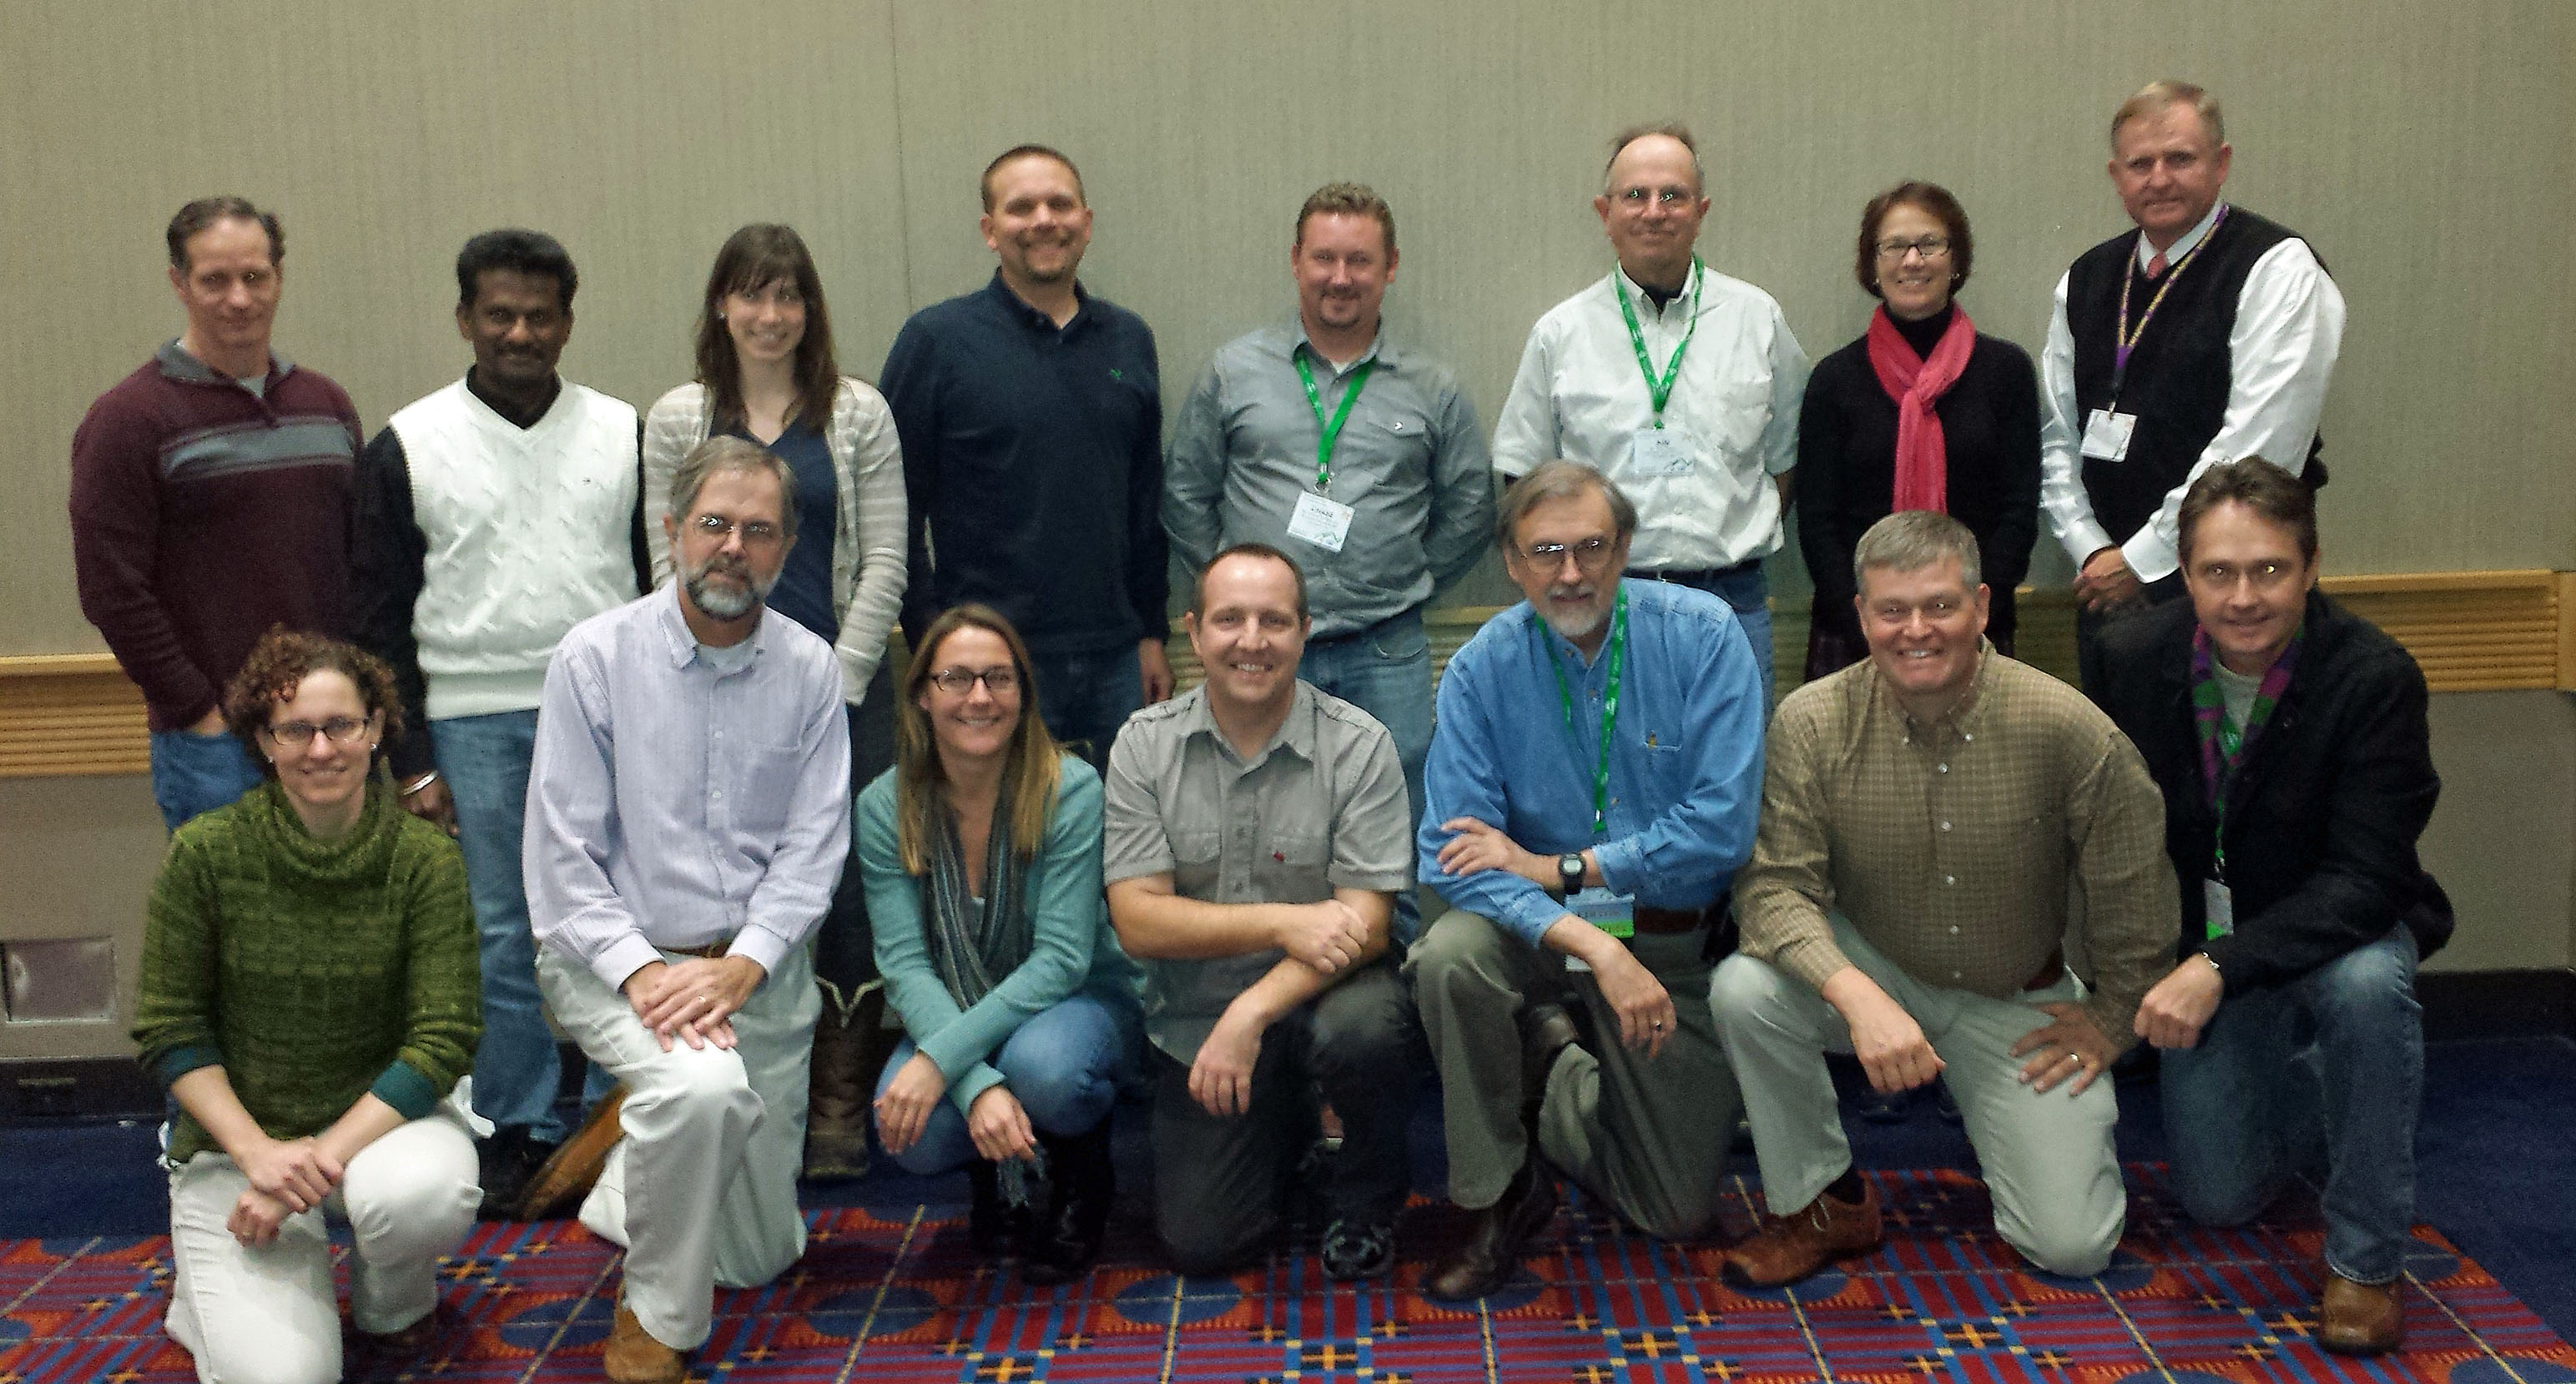 S1052 attendees 2014 annual meeting in Portland, OR